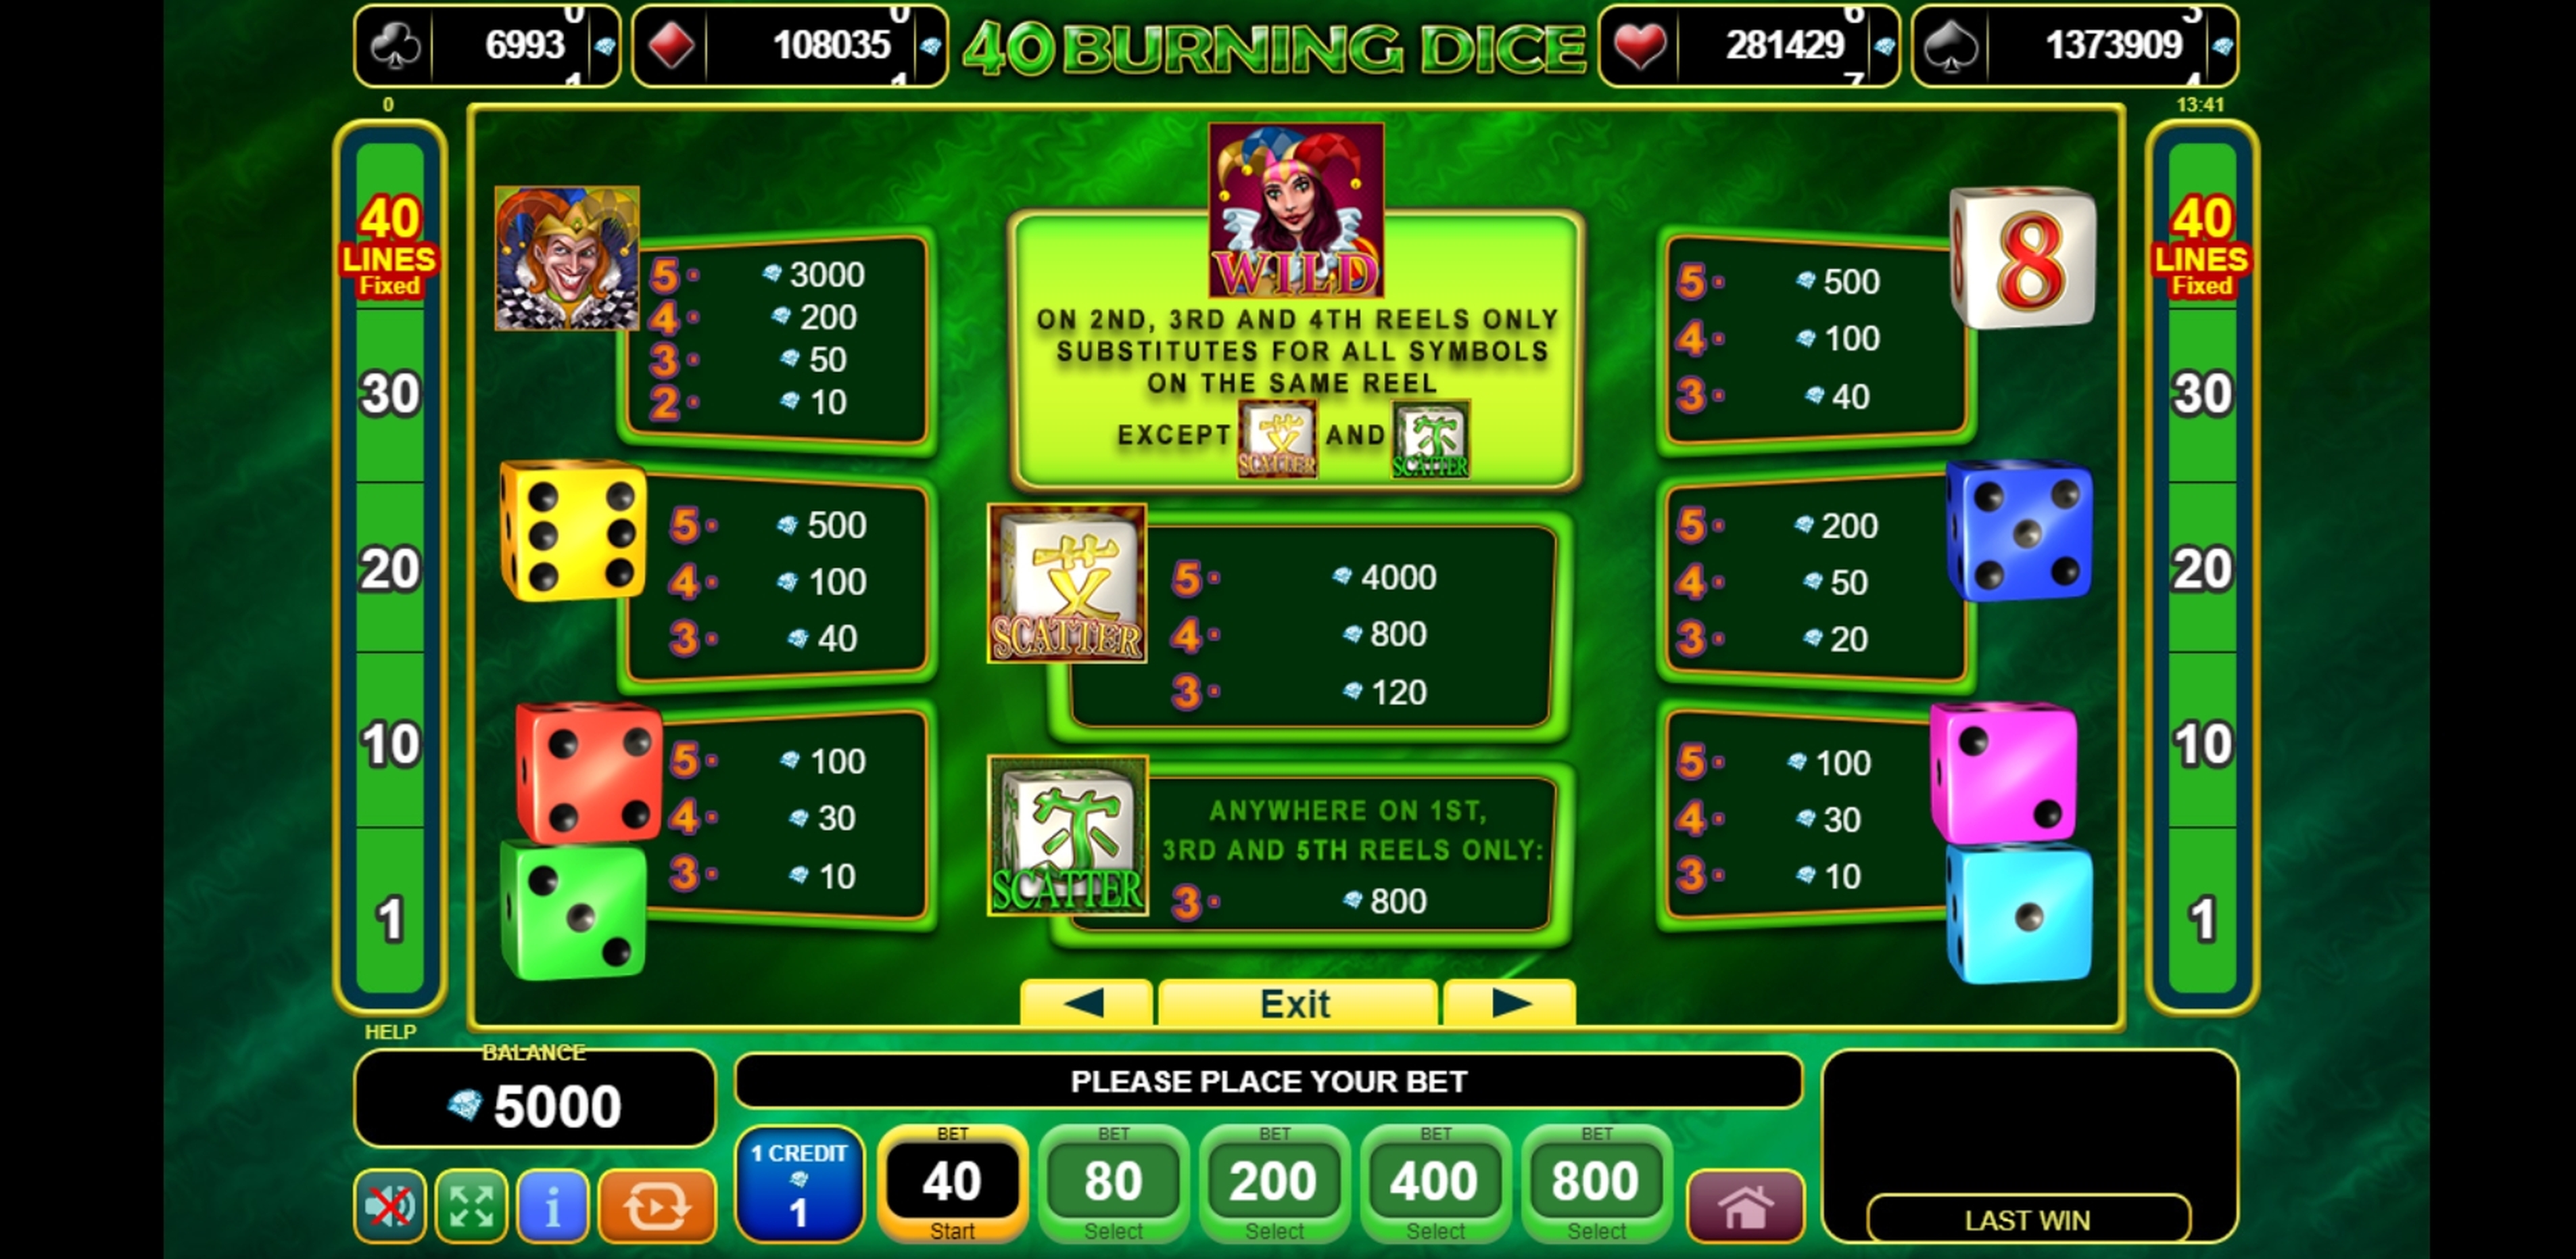 Info of 40 Burning Dice Slot Game by EGT